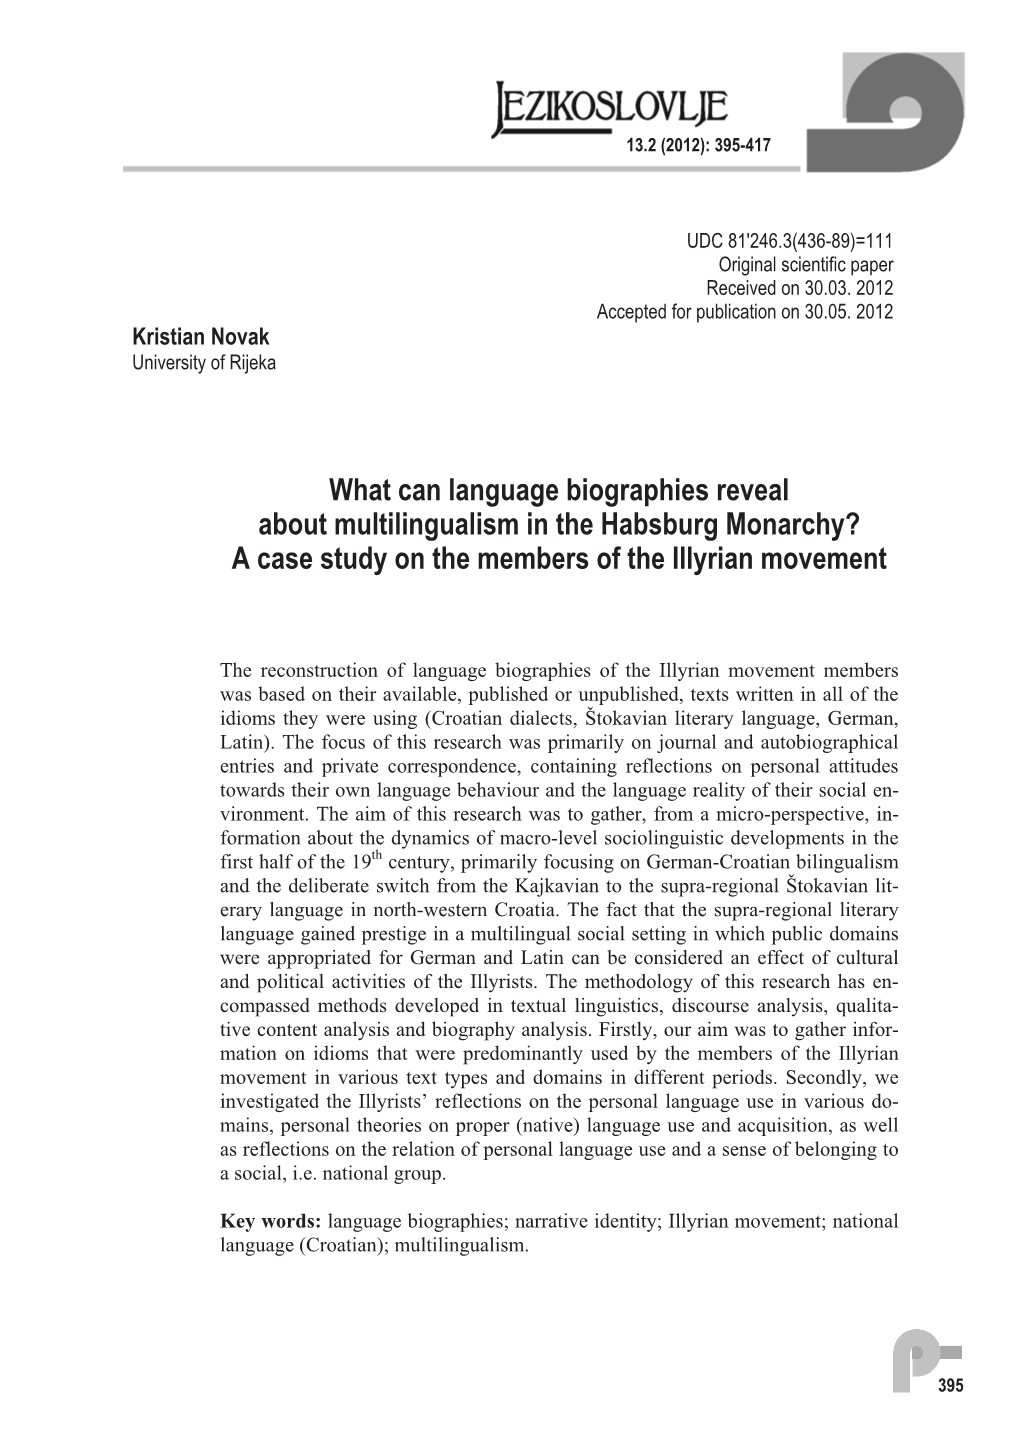 What Can Language Biographies Reveal About Multilingualism in the Habsburg Monarchy? a Case Study on the Members of the Illyrian Movement